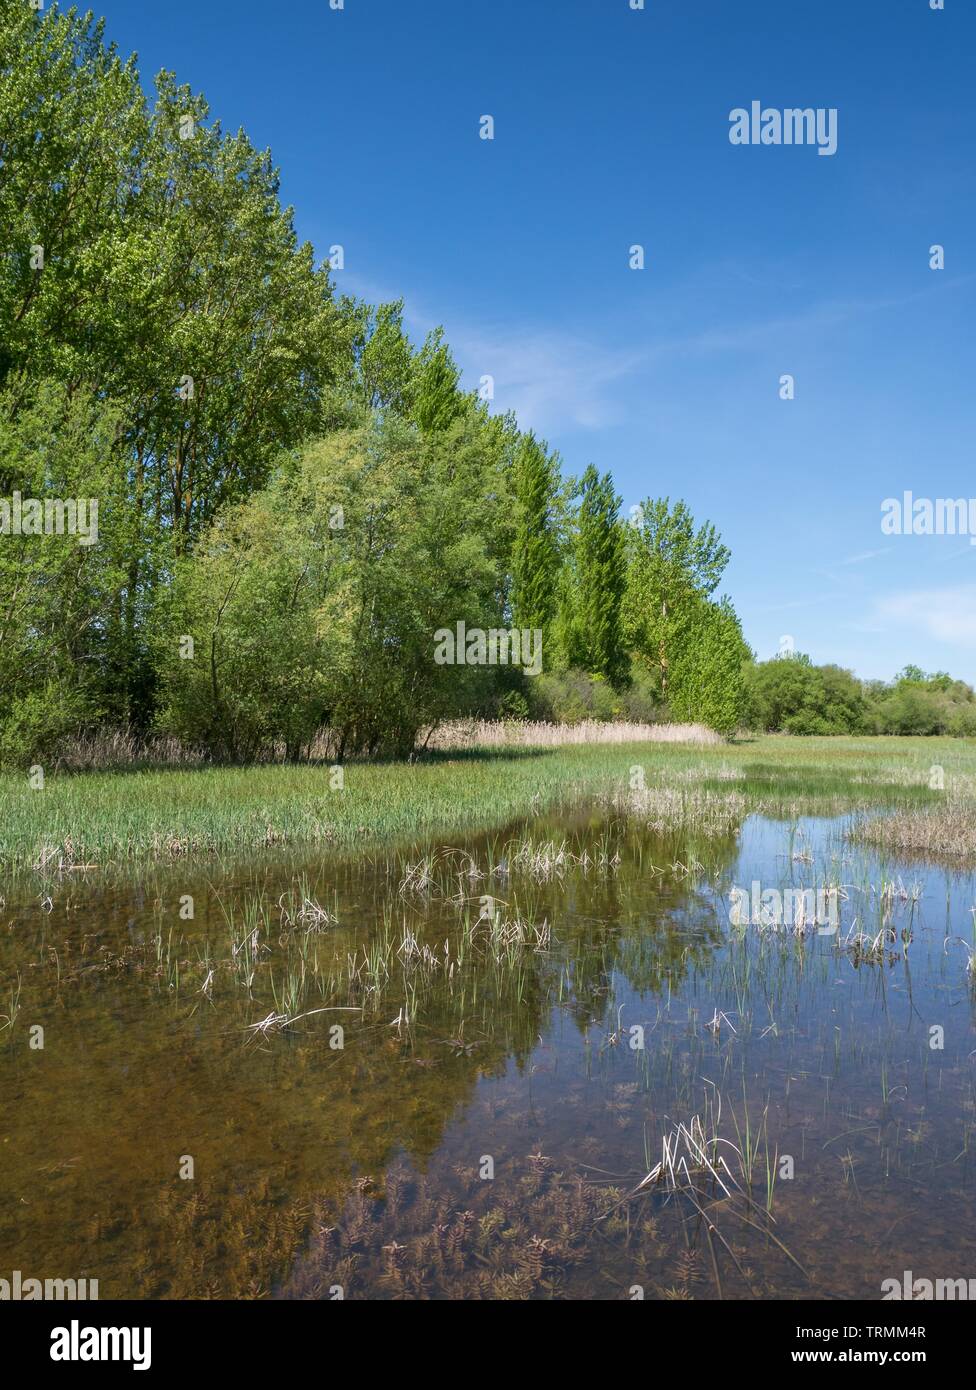 Typical landscape of the Salburua Wetlands on a sunny day spring, Vitoria-Gasteiz, Basque Country, Spain Stock Photo